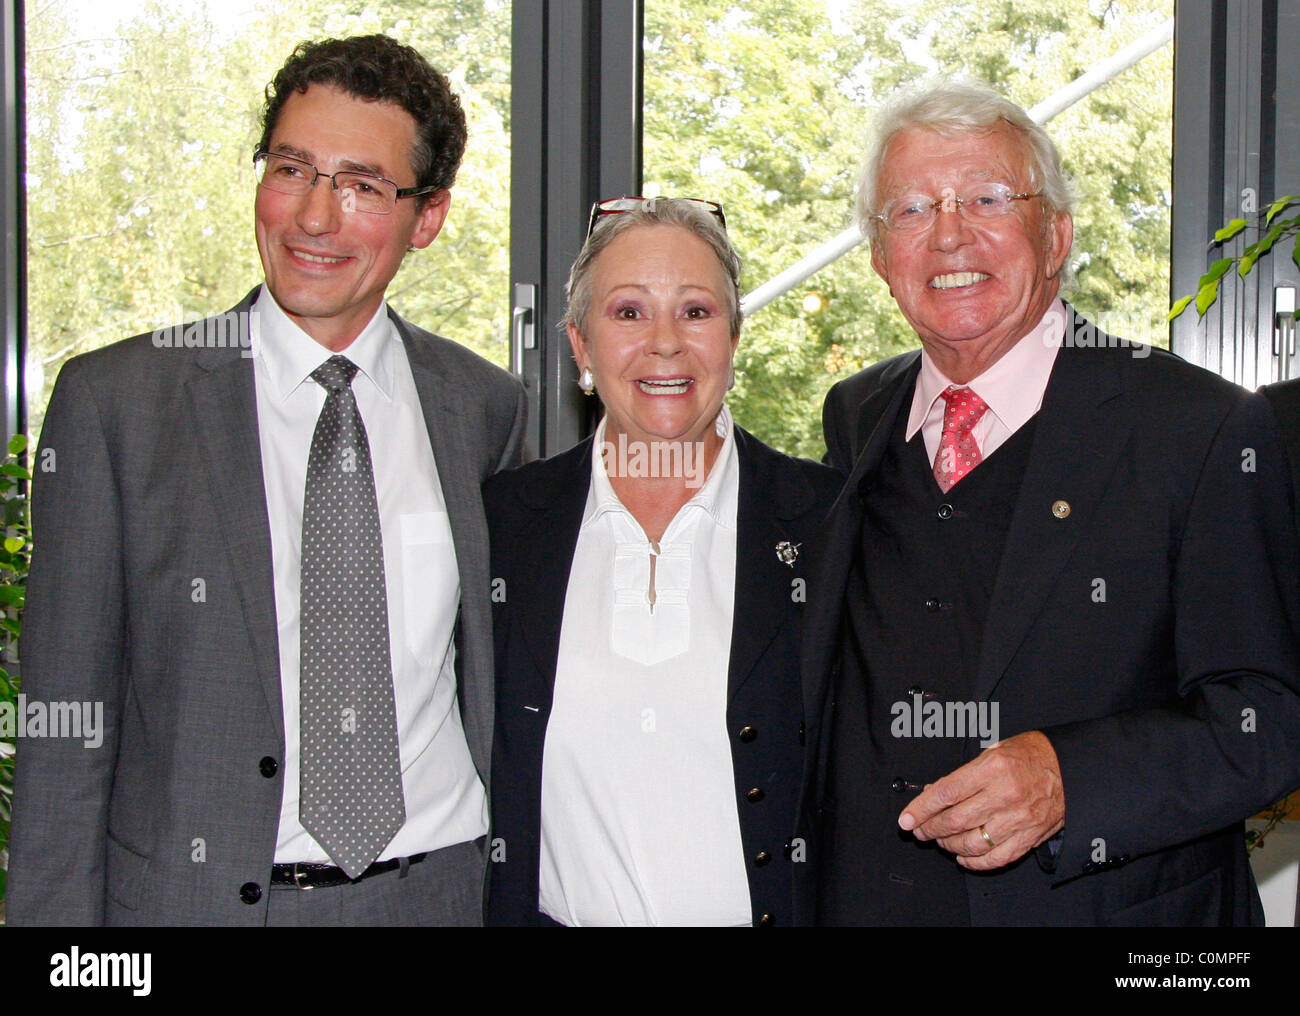 Dr. Ernst Johannes Haberl, Dieter Thomas Heck and his wife  Ragnhild Heck  Press conference of the Grit Jordan Verein e.V. Stock Photo